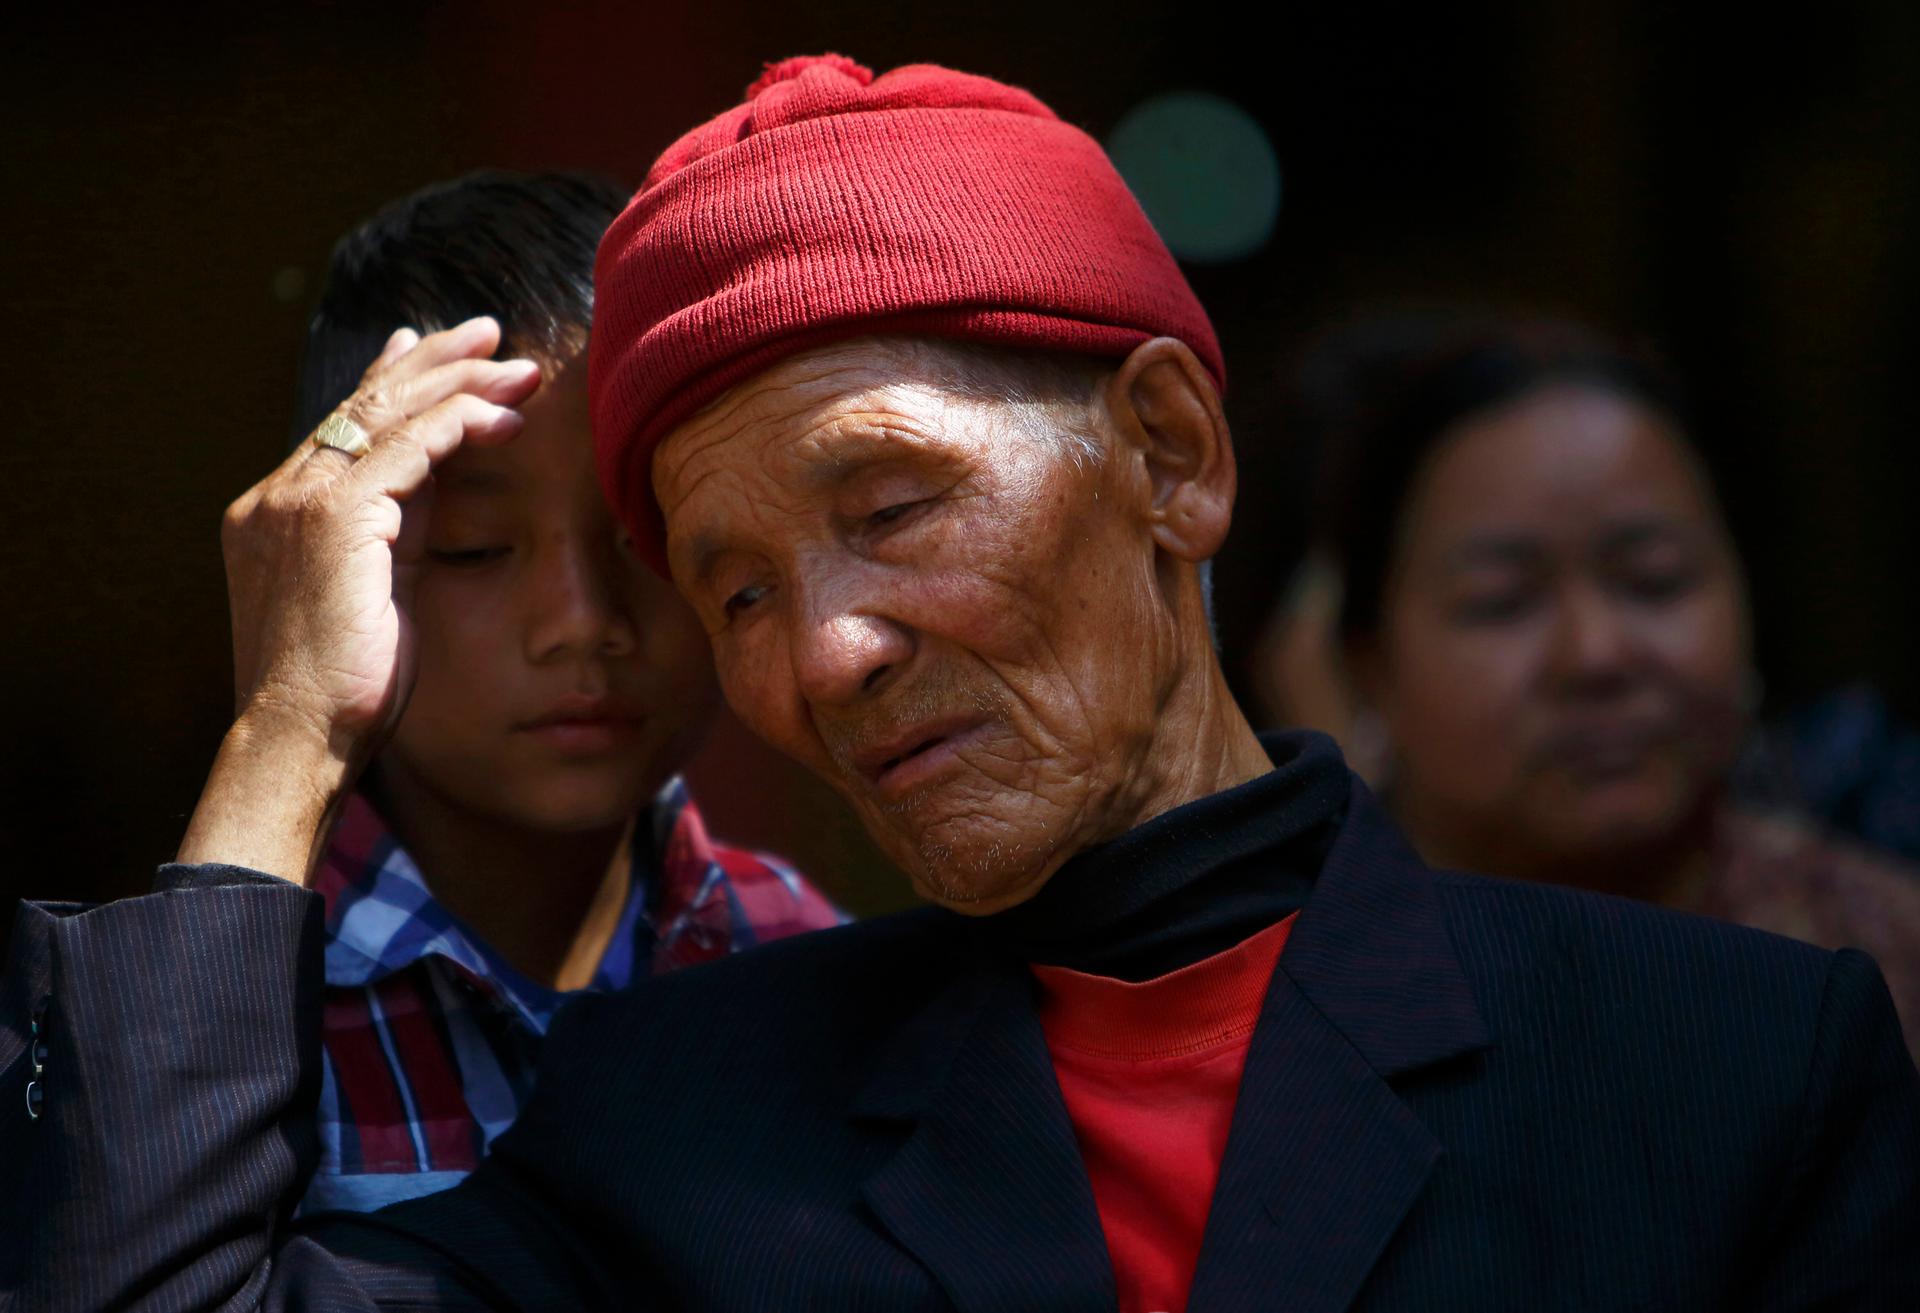 The father of Kaji Sherpa, one of 13 Nepali mountaineering guides who lost his life in an avalanche on Mount Everest, comforts his grandson as he waits for the body of his son to arrive at Sherpa Monastery in Kathmandu April 19, 2014.